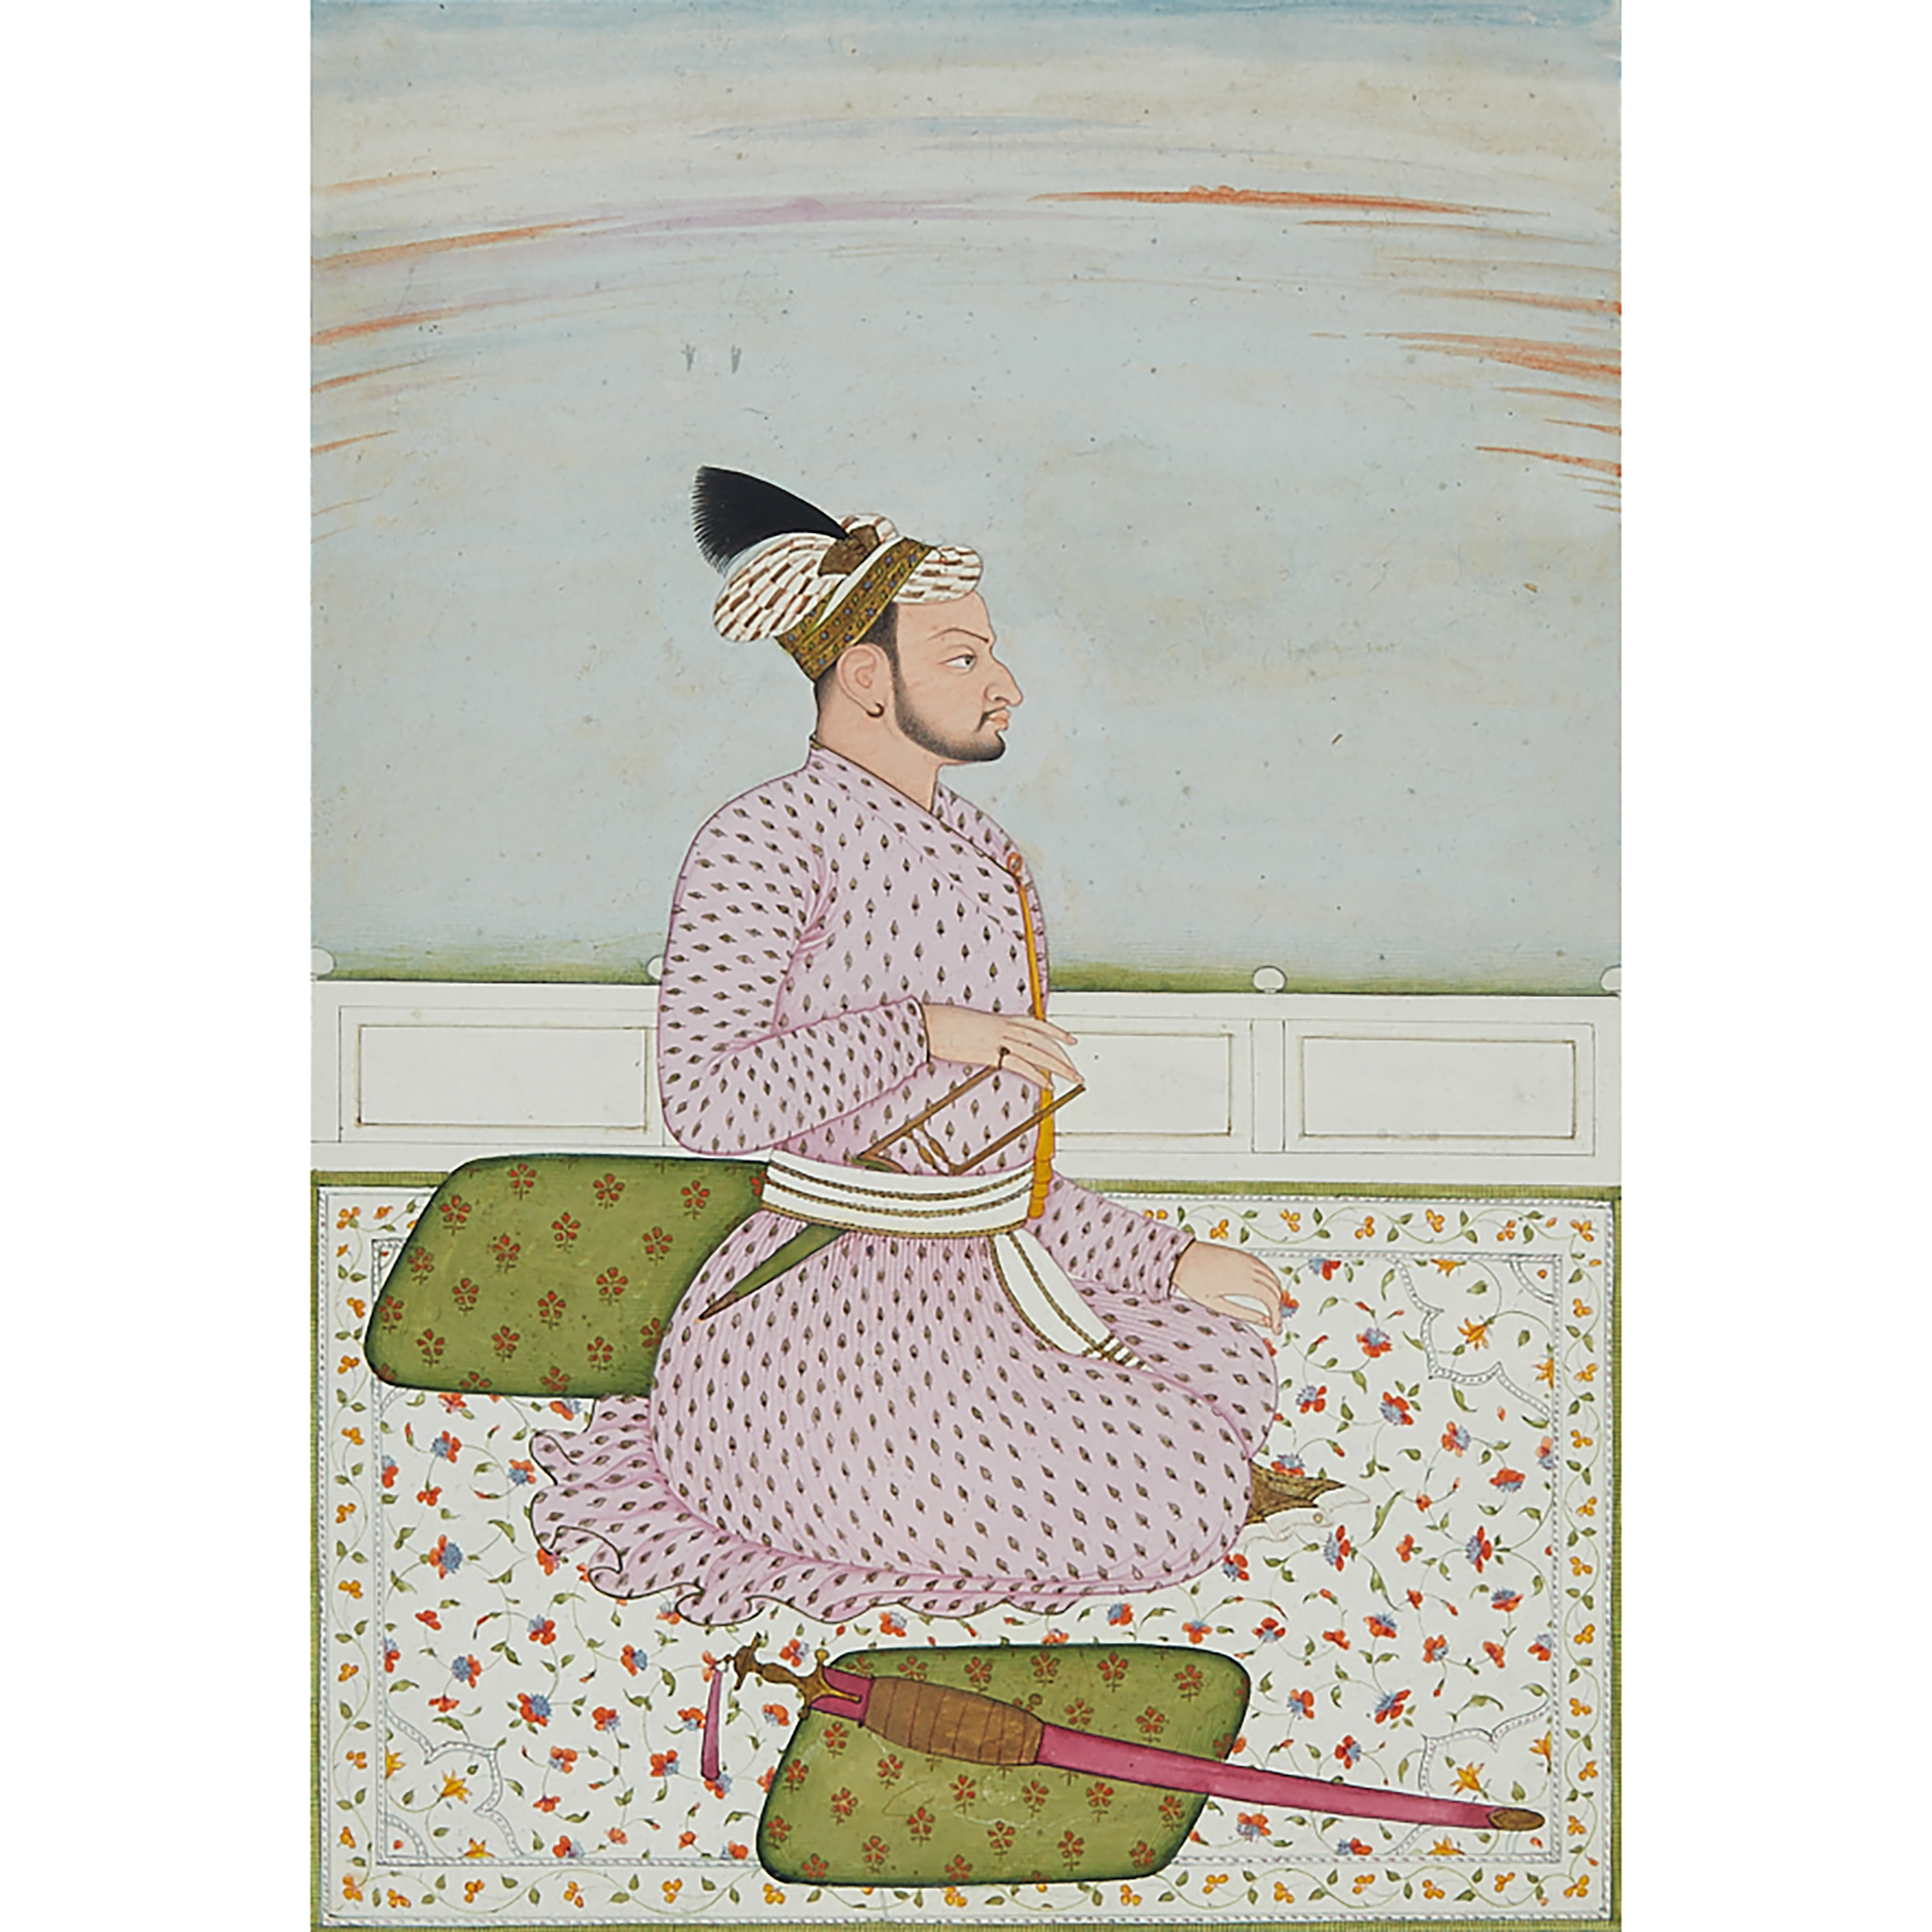 Rajasthan School, Portrait of a Seated Prince, 19th Century